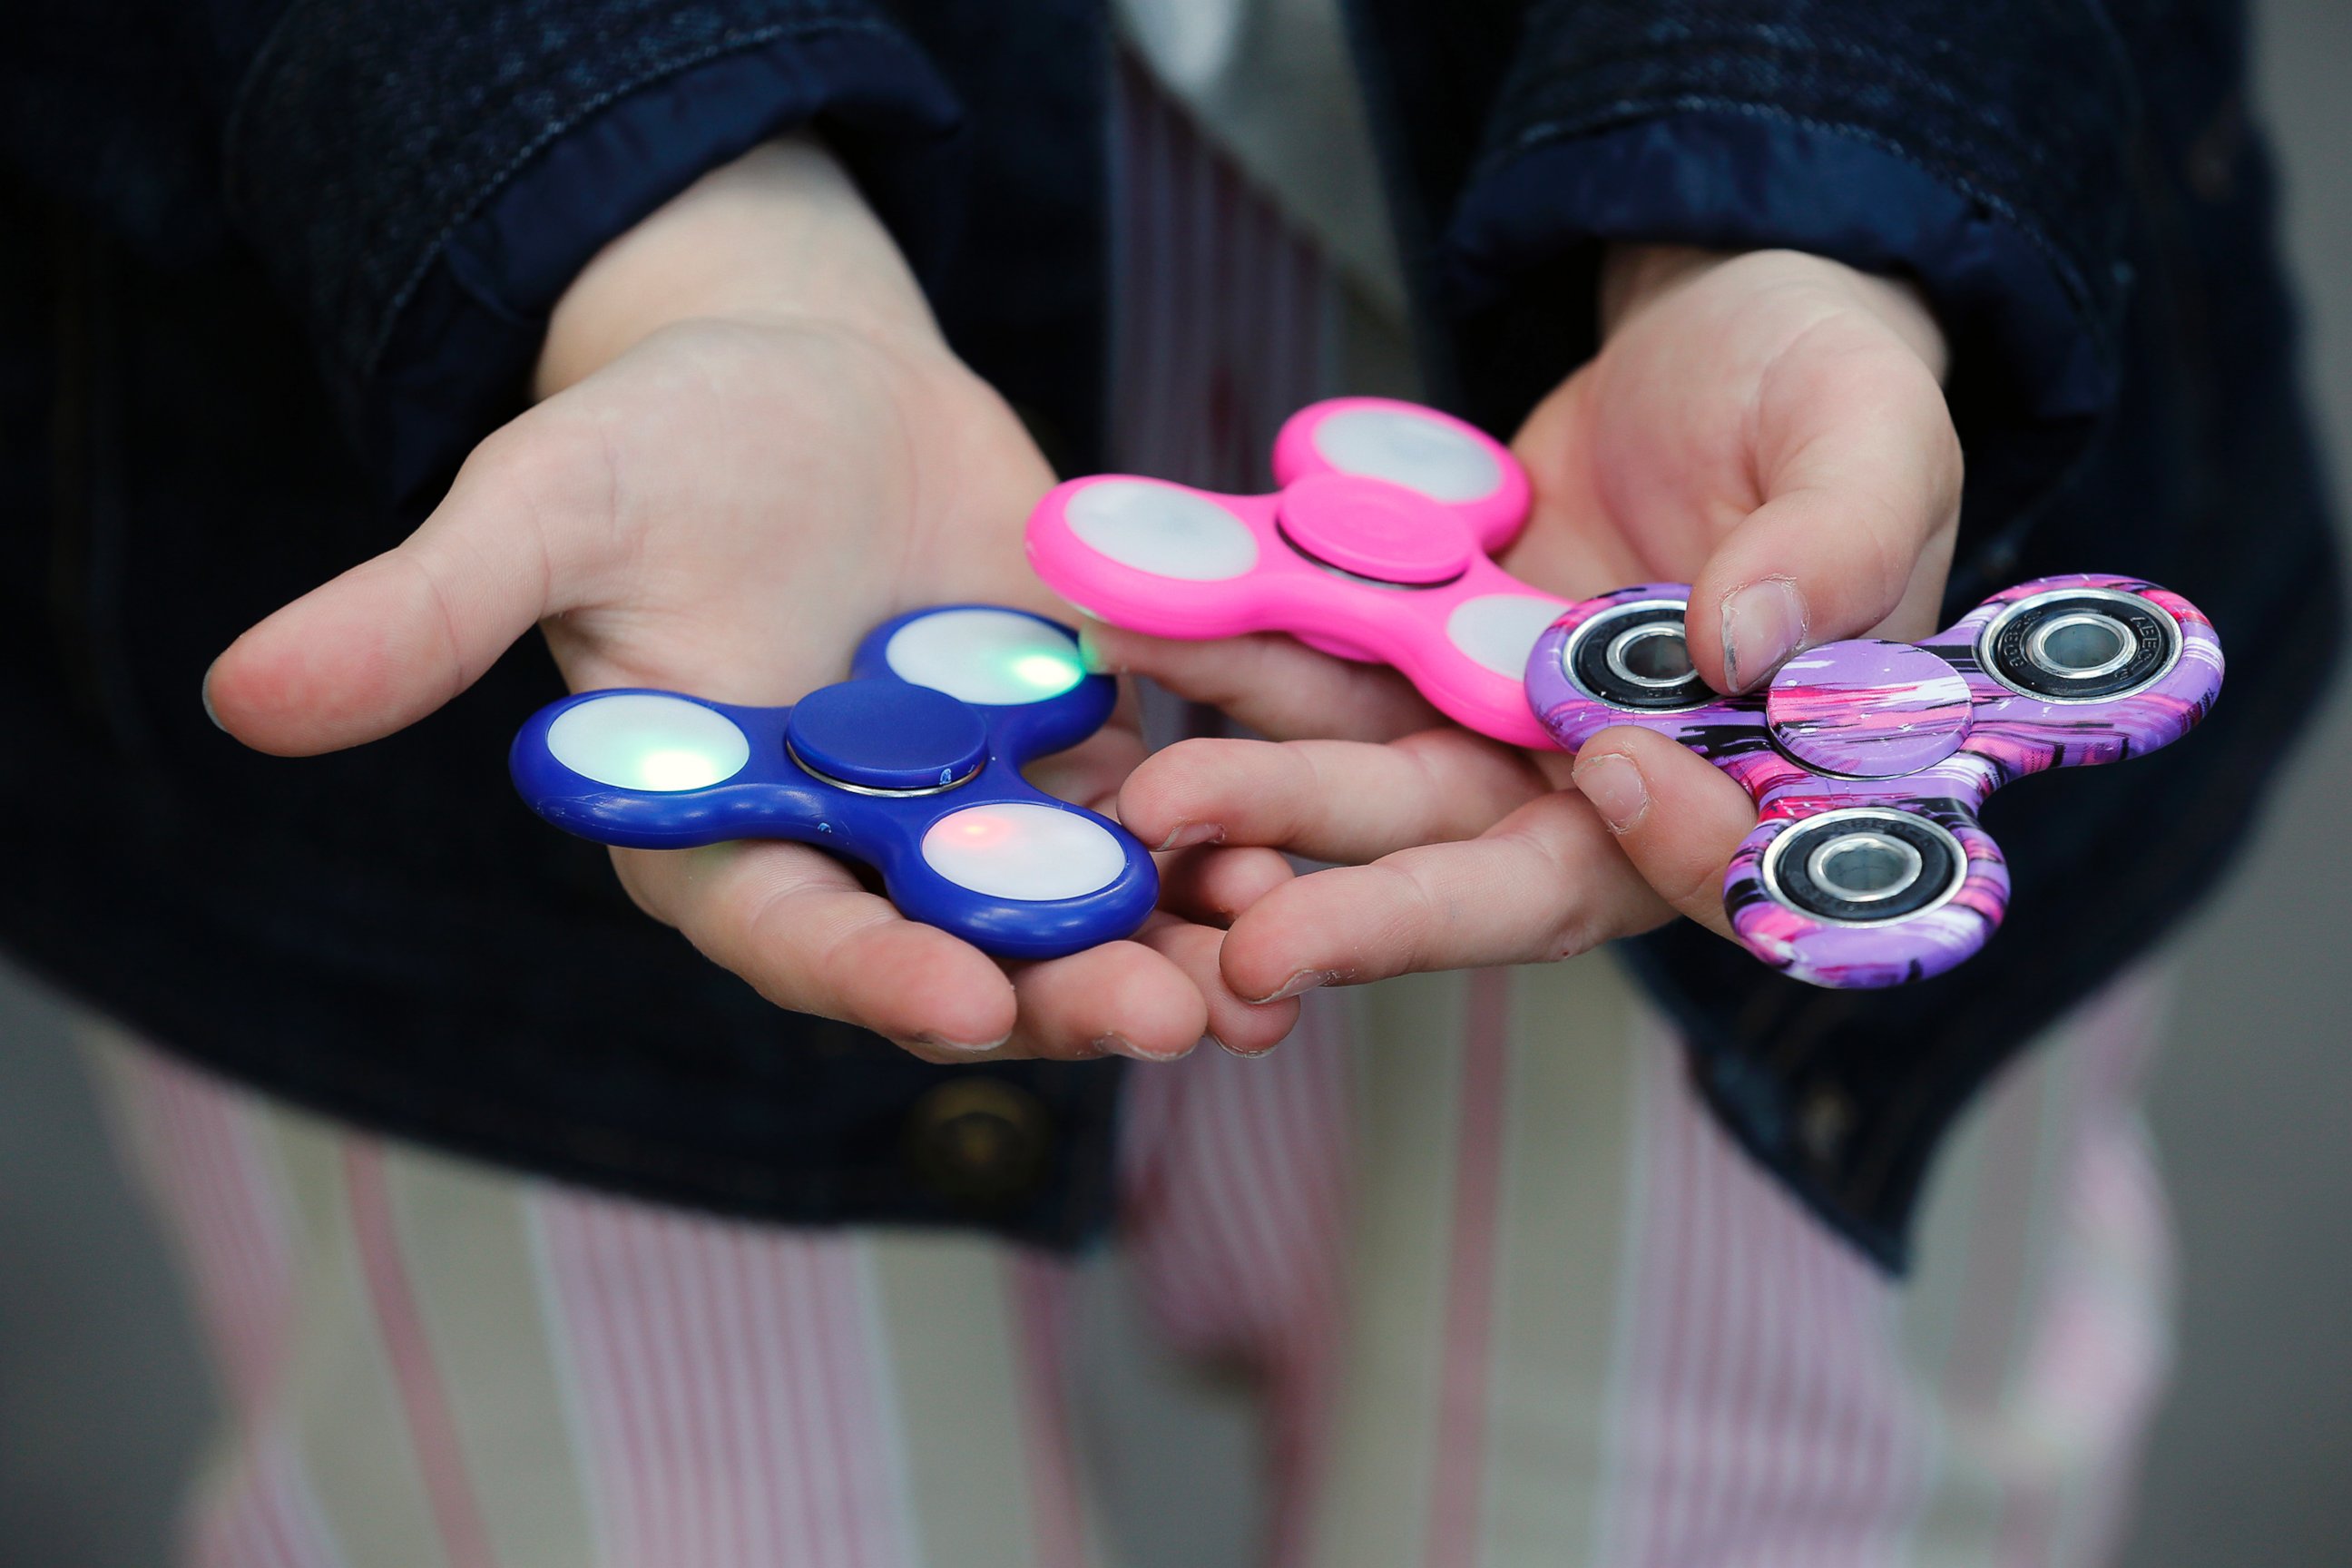 PHOTO: "Fidget Spinners" are being investigated by the Consumer Product Safety Commission after two separate cases of children swallowing parts of the gadget sparked concerns.